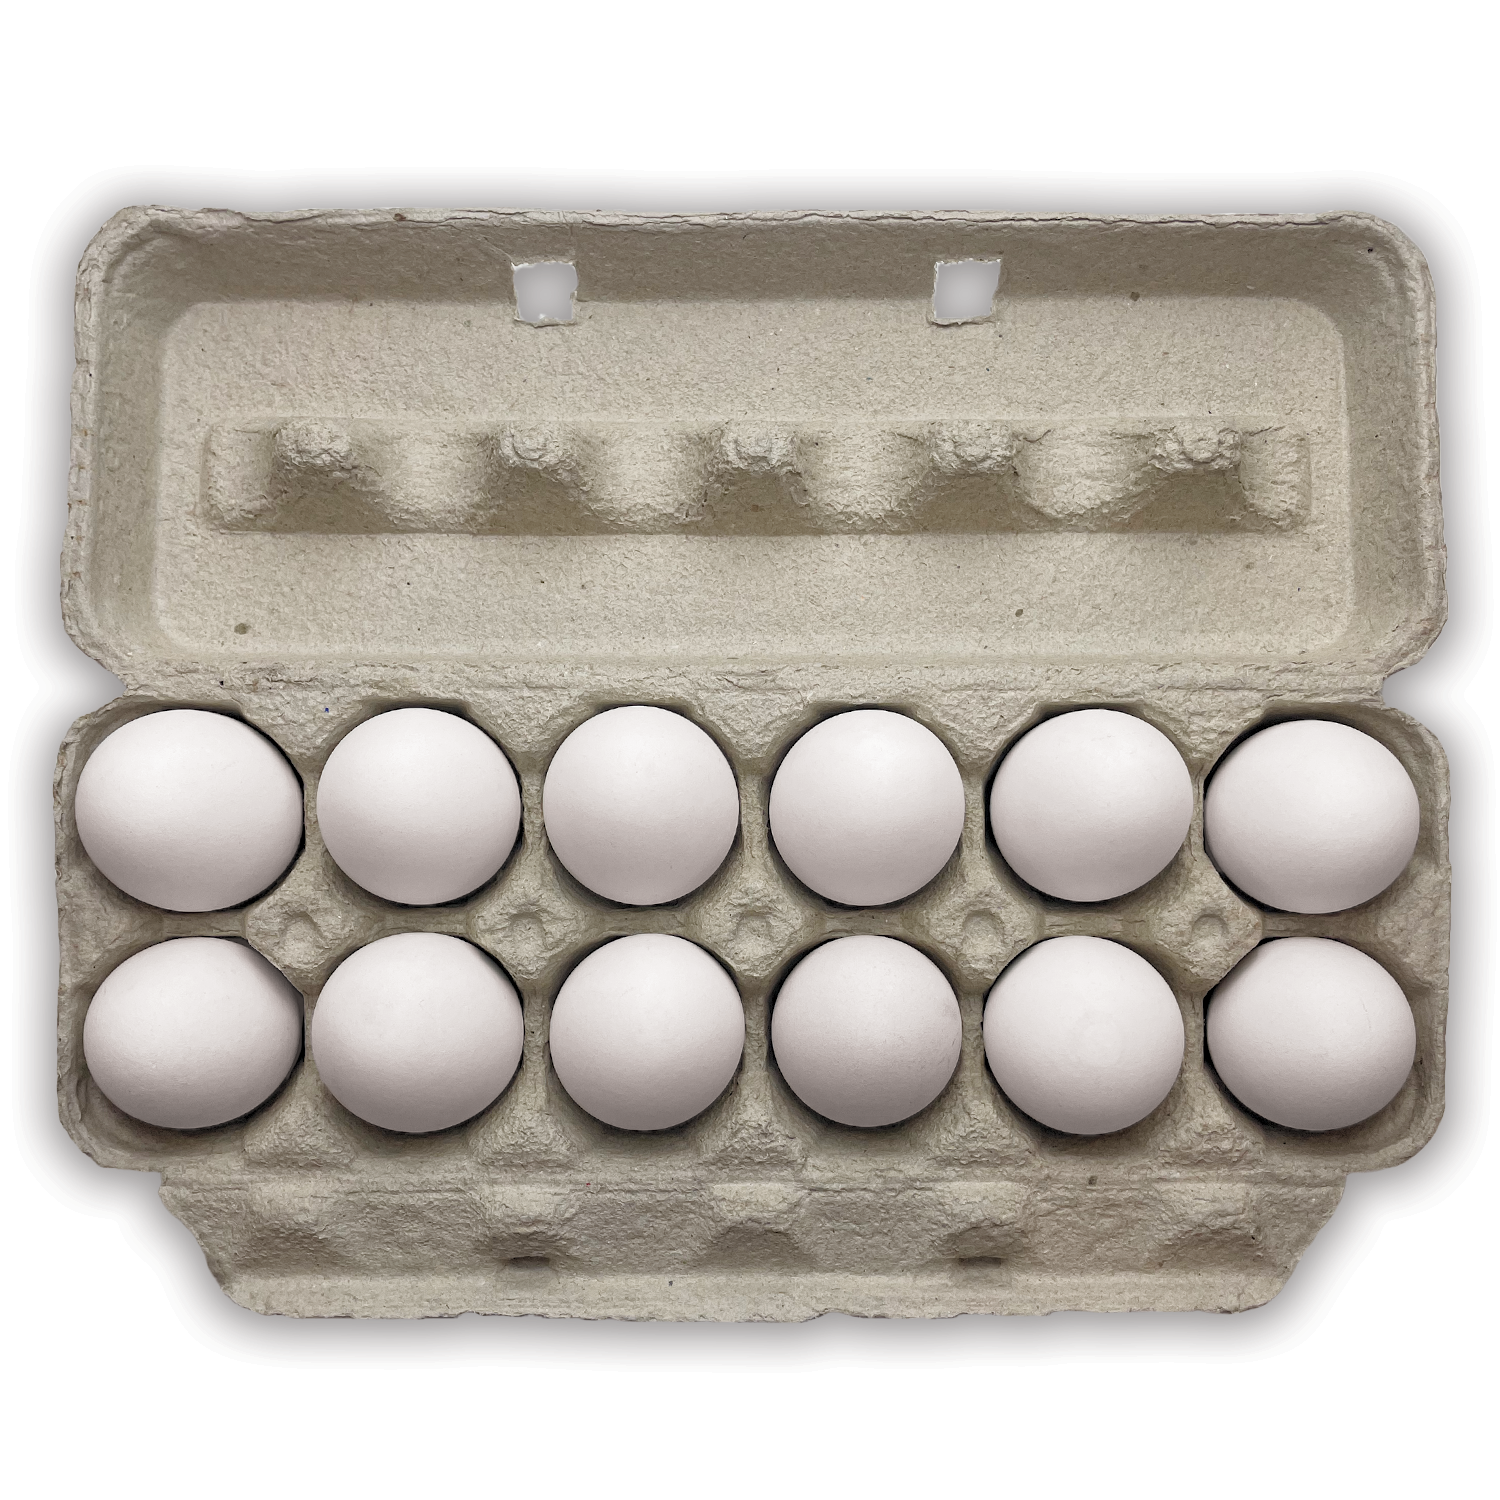 Okuna Outpost 15 Pack Brown Paper Cardboard Egg Carton with Jute String and  Stickers, Holds 10 Eggs Each